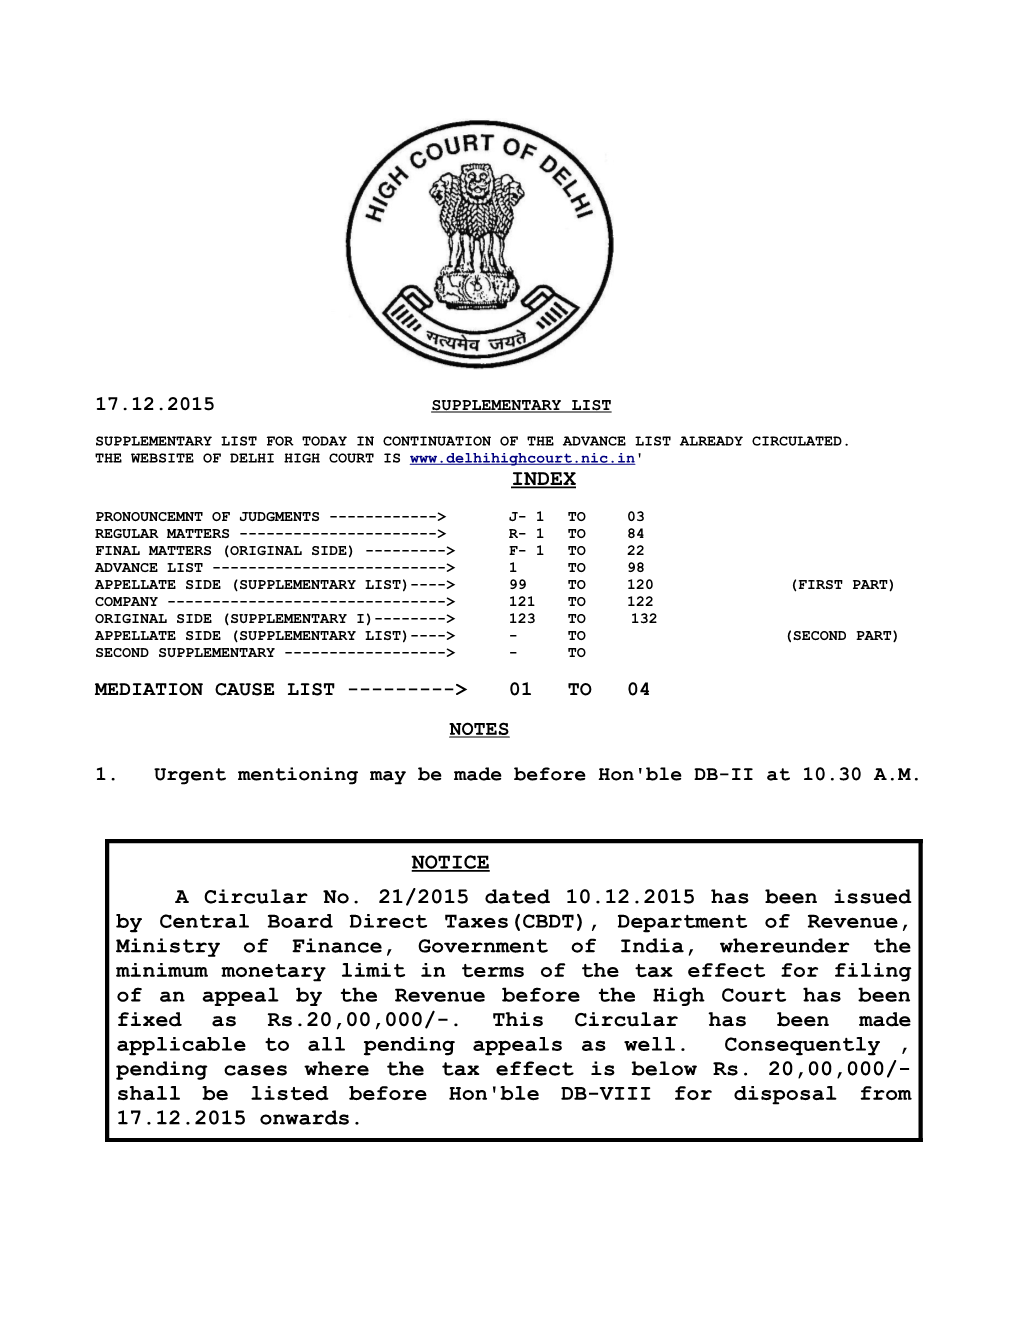 NOTICE a Circular No. 21/2015 Dated 10.12.2015 Has Been Issued By